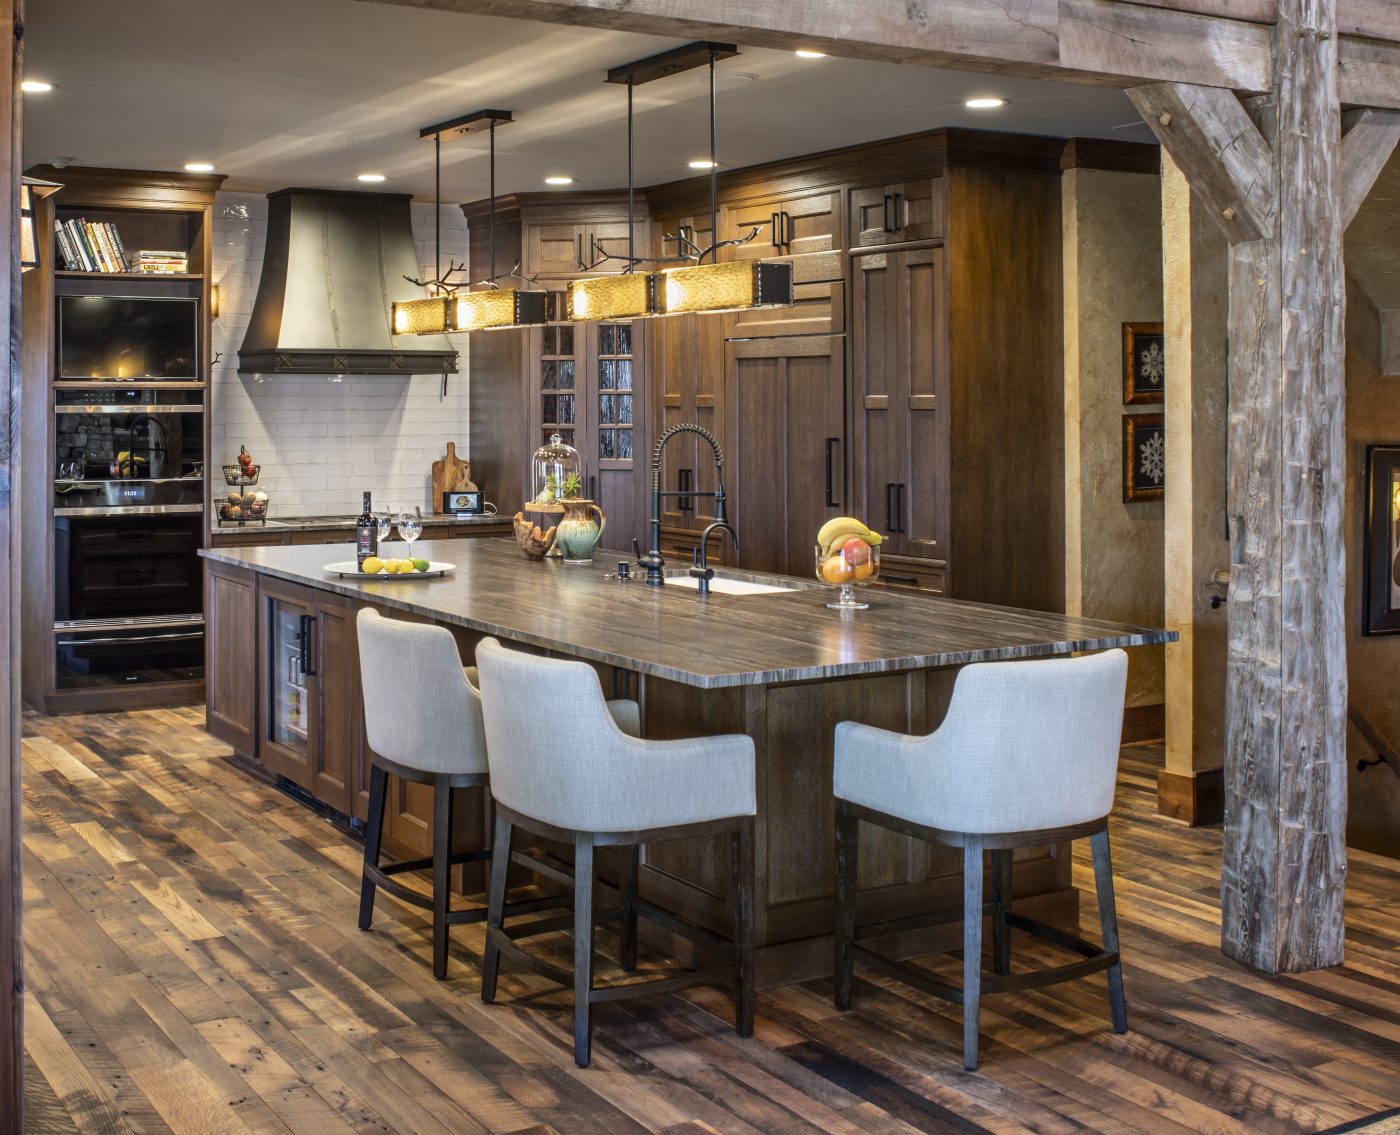 Mountain Retreat in Silva,NC | Packard Cabinetry